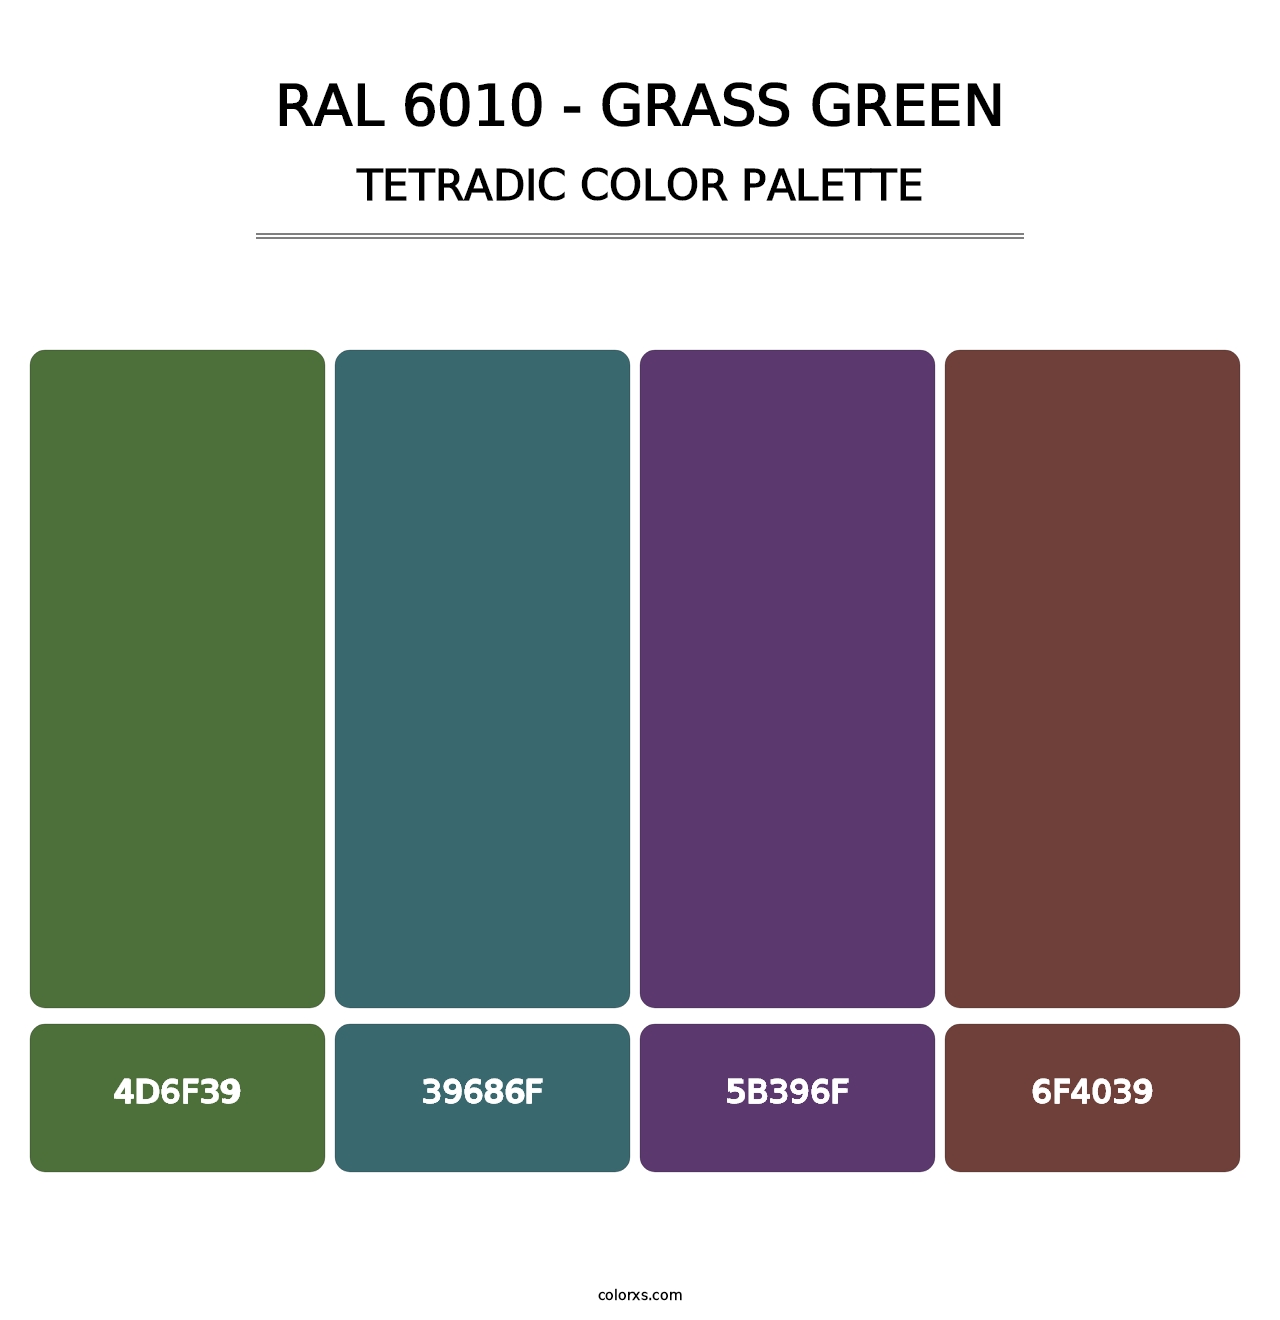 RAL 6010 - Grass Green - Tetradic Color Palette